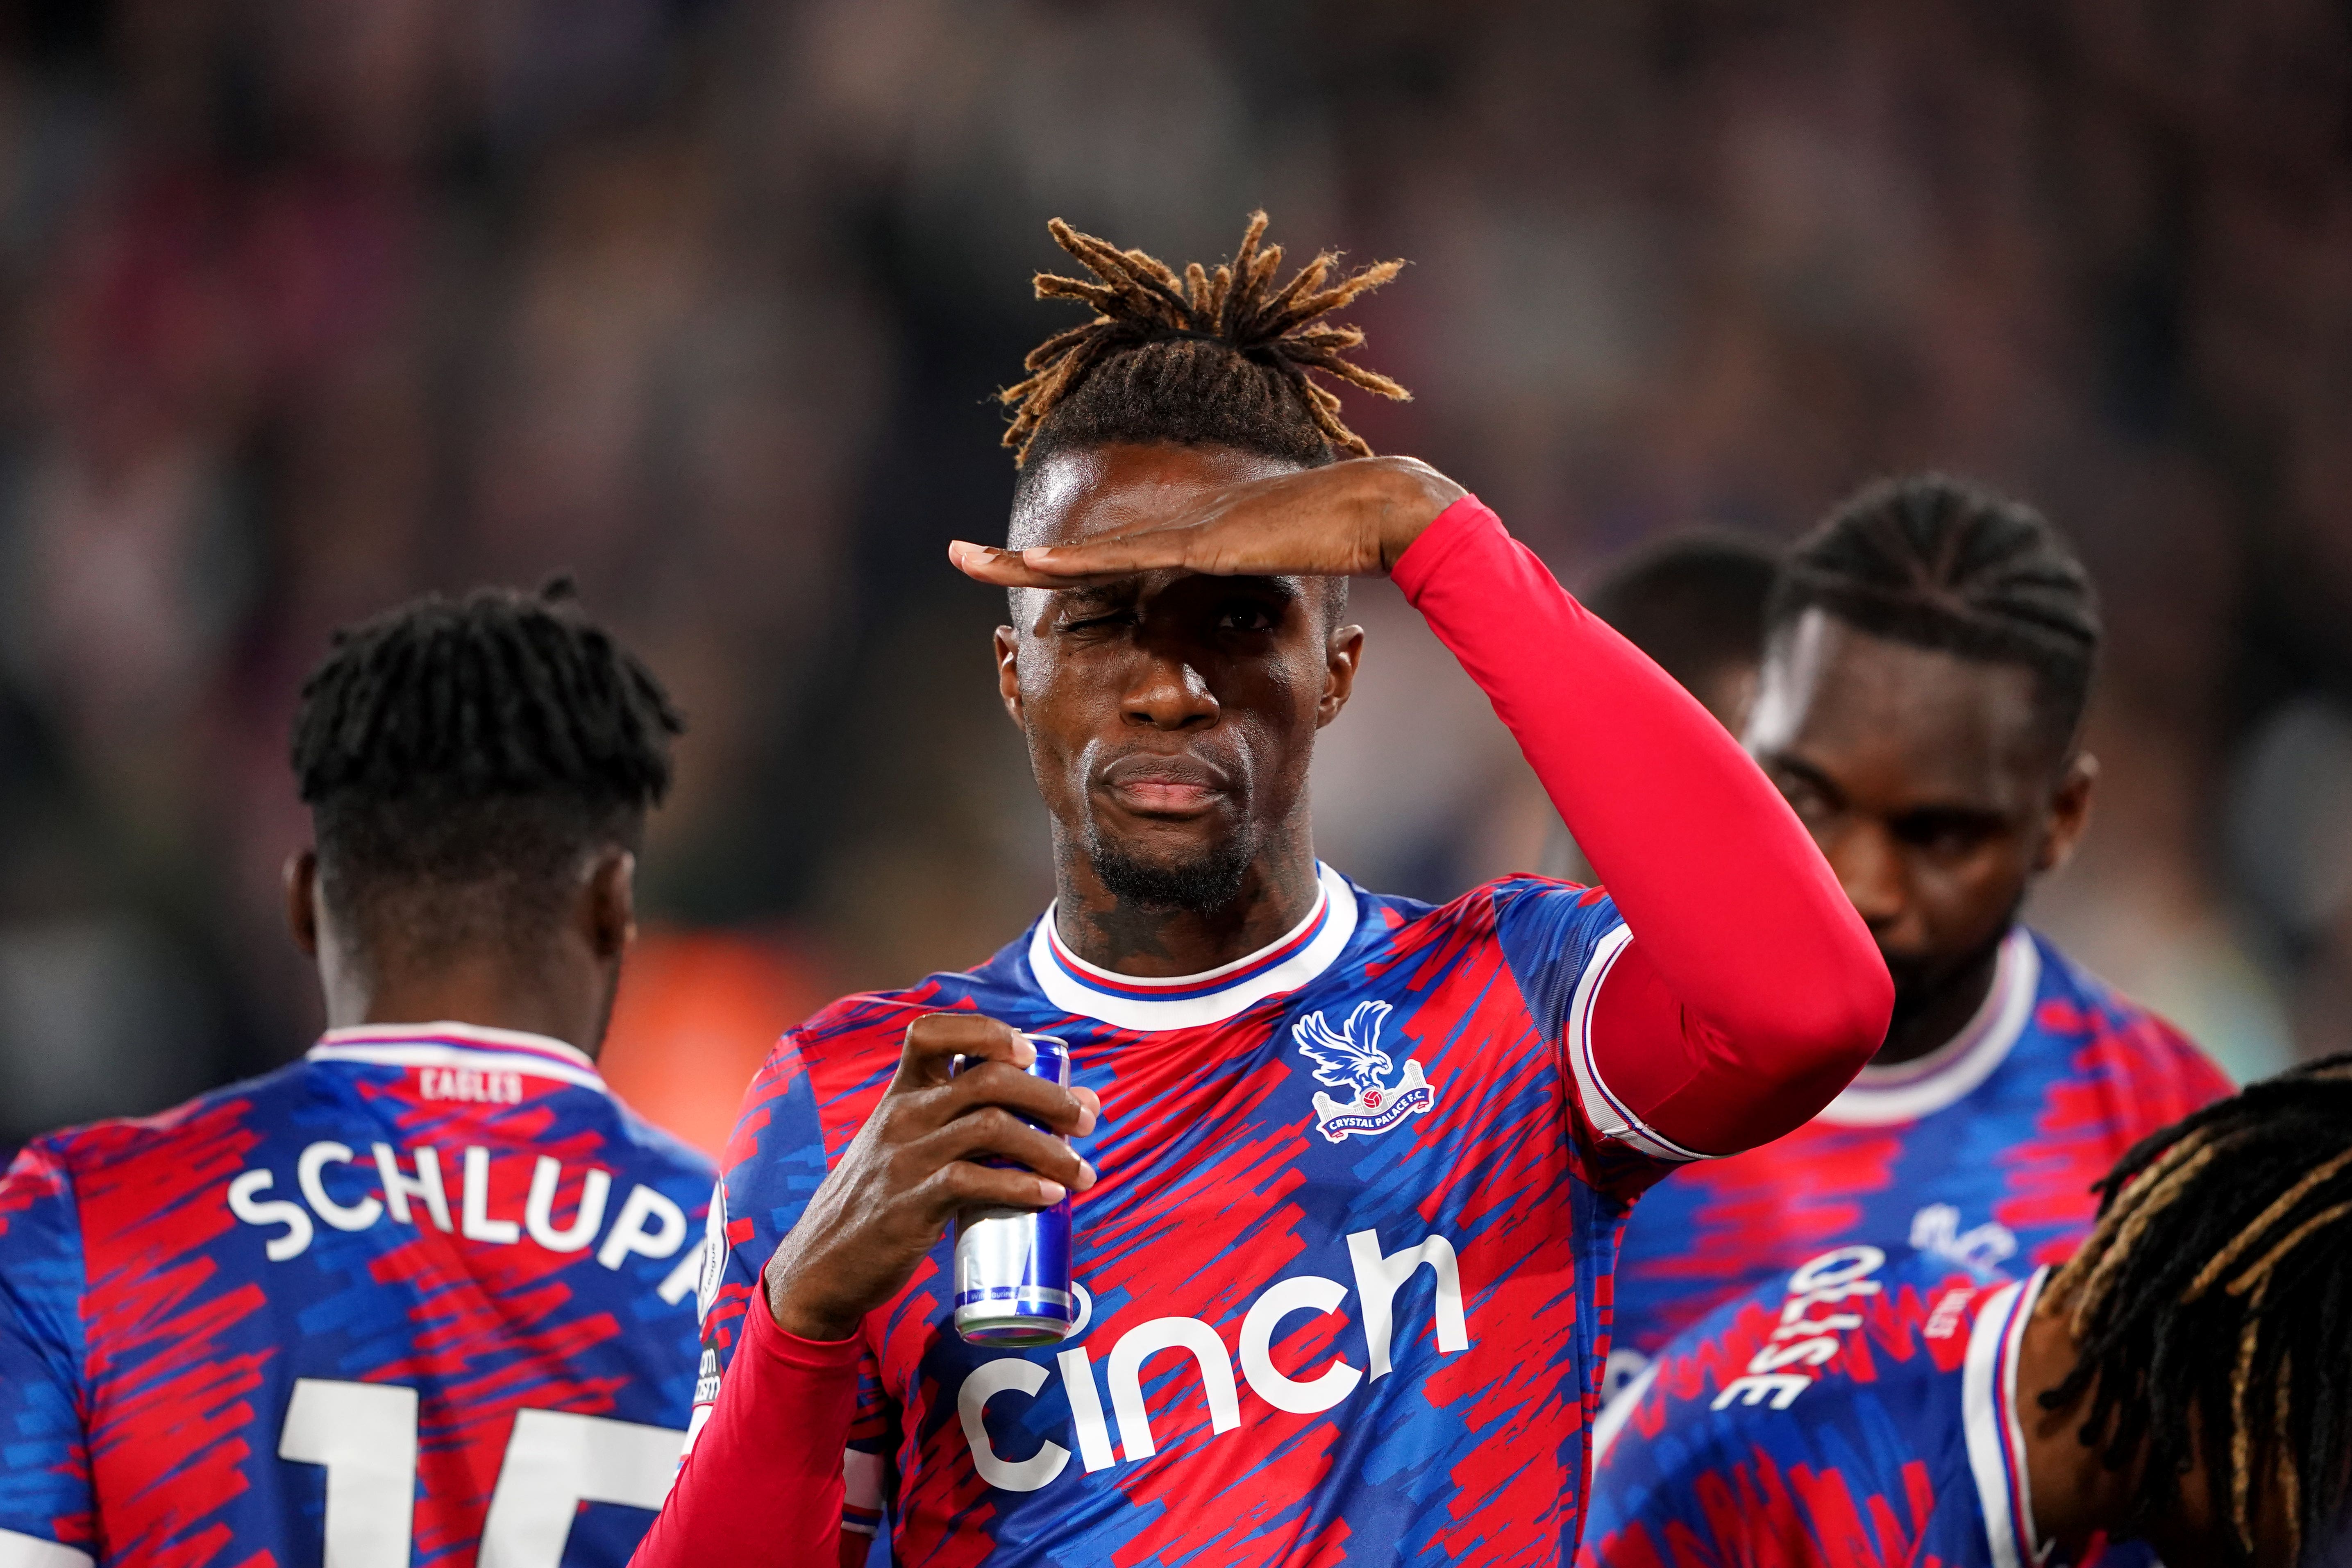 Wilfried Zaha could play for many top teams, insists former boss David  Moyes | The Independent